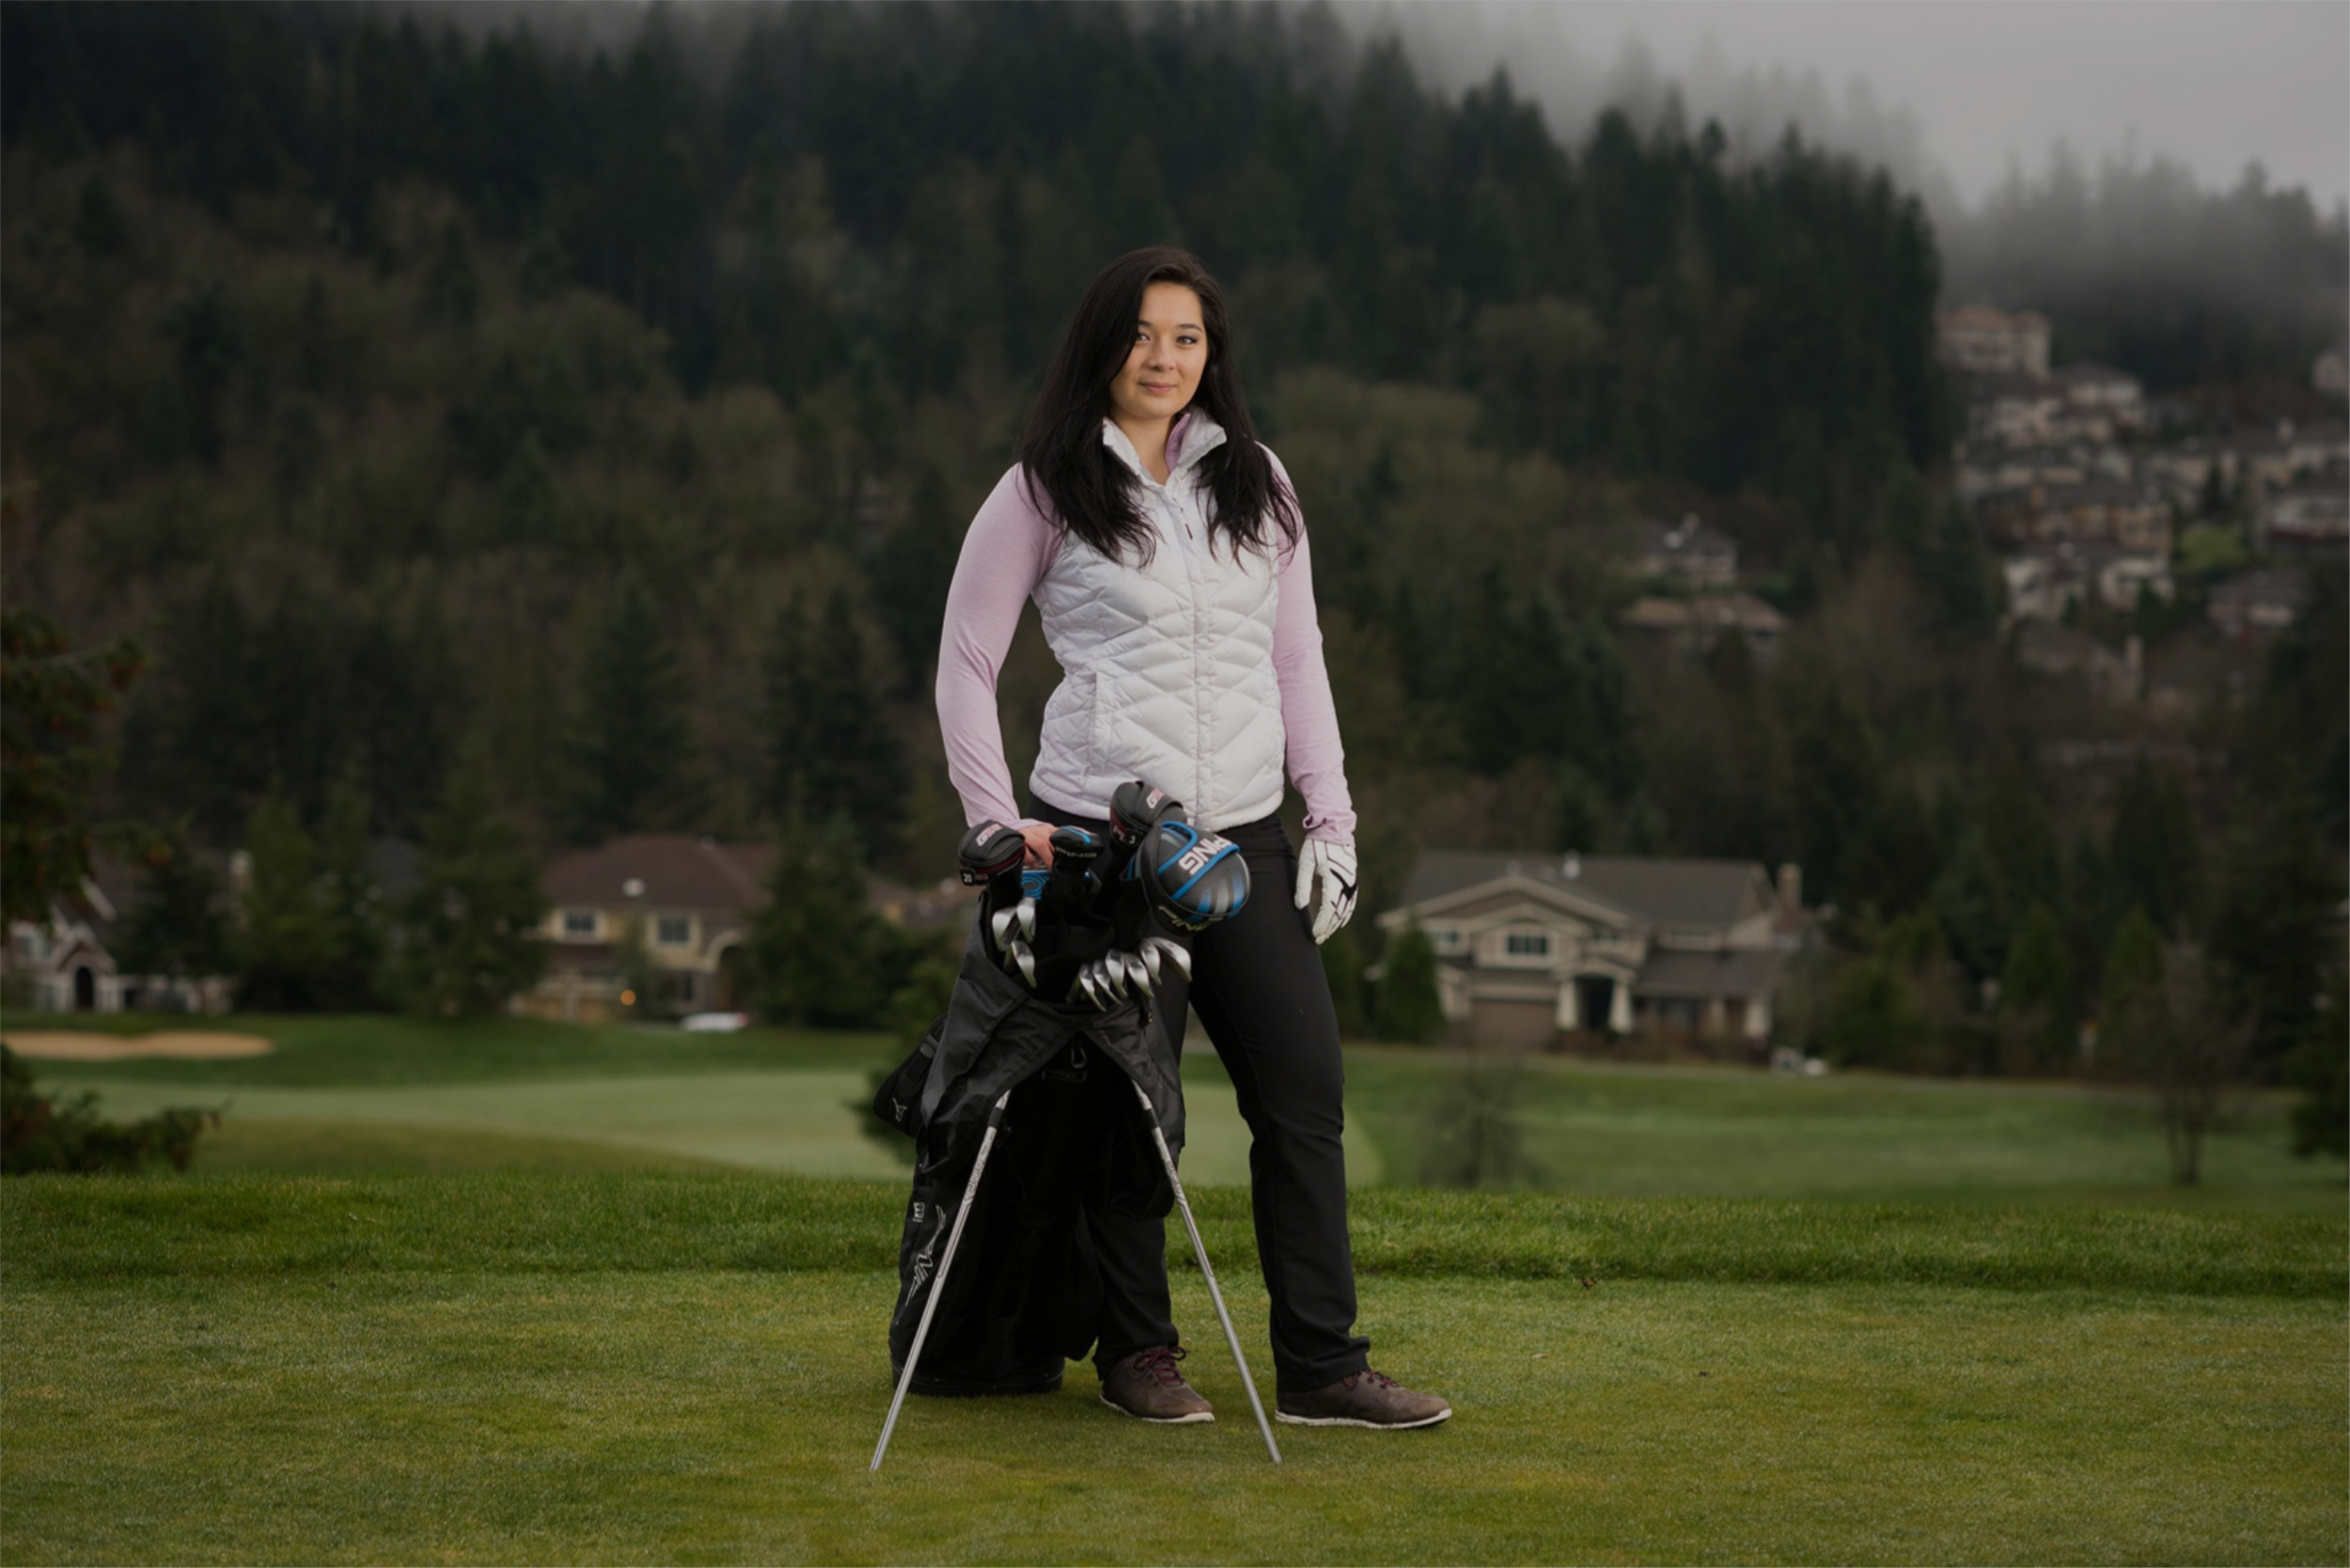 Young woman golfer posing on green with golf clubs at her side inside golf bag resting on tripod. Wearing a long sleeve and pants with brown golfing shoes and a vest jacket. Background includes, grass, trees, homes and fog.